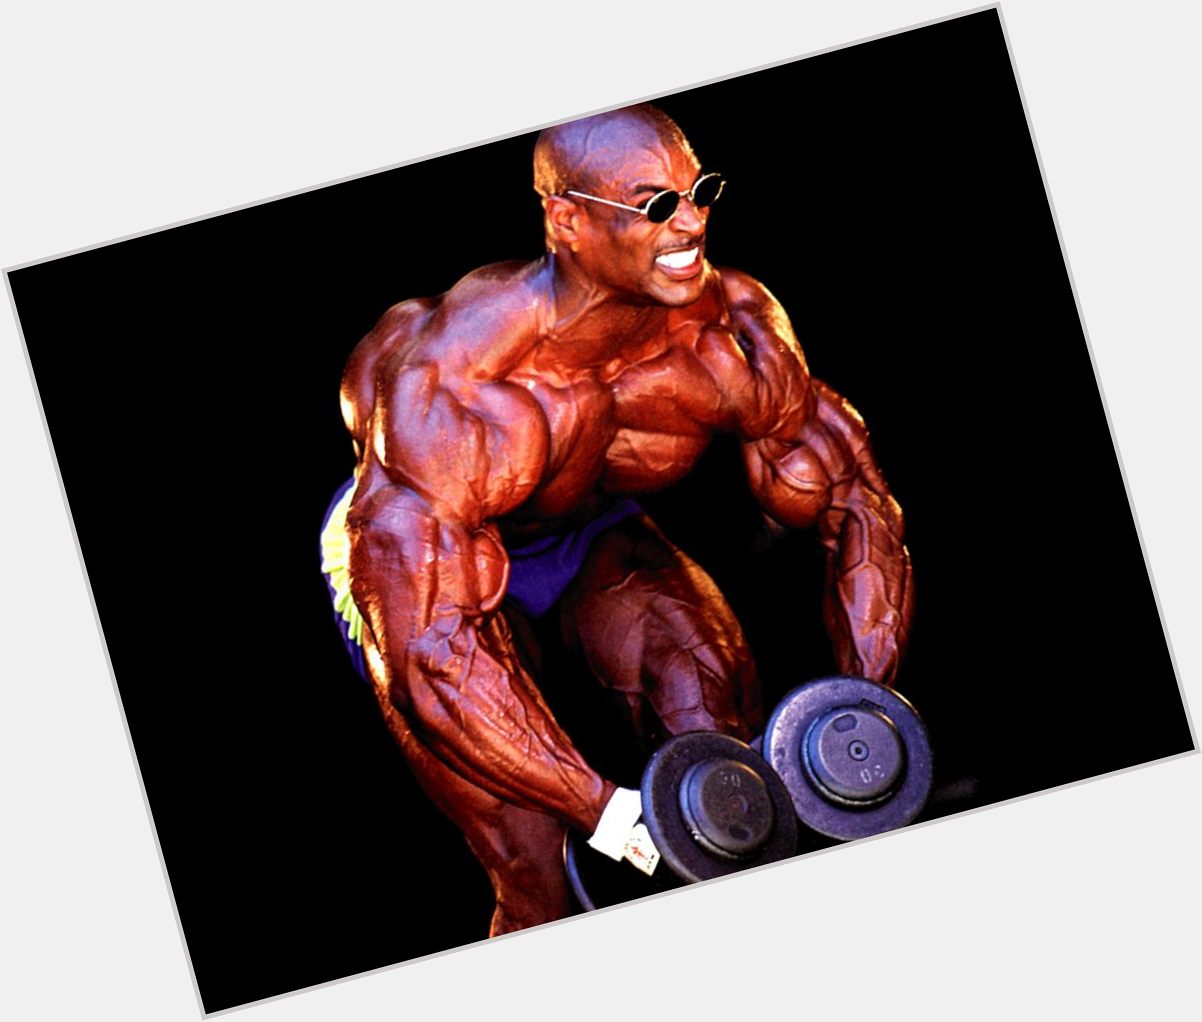 Ronnie Coleman exclusive hot pic 5.jpg